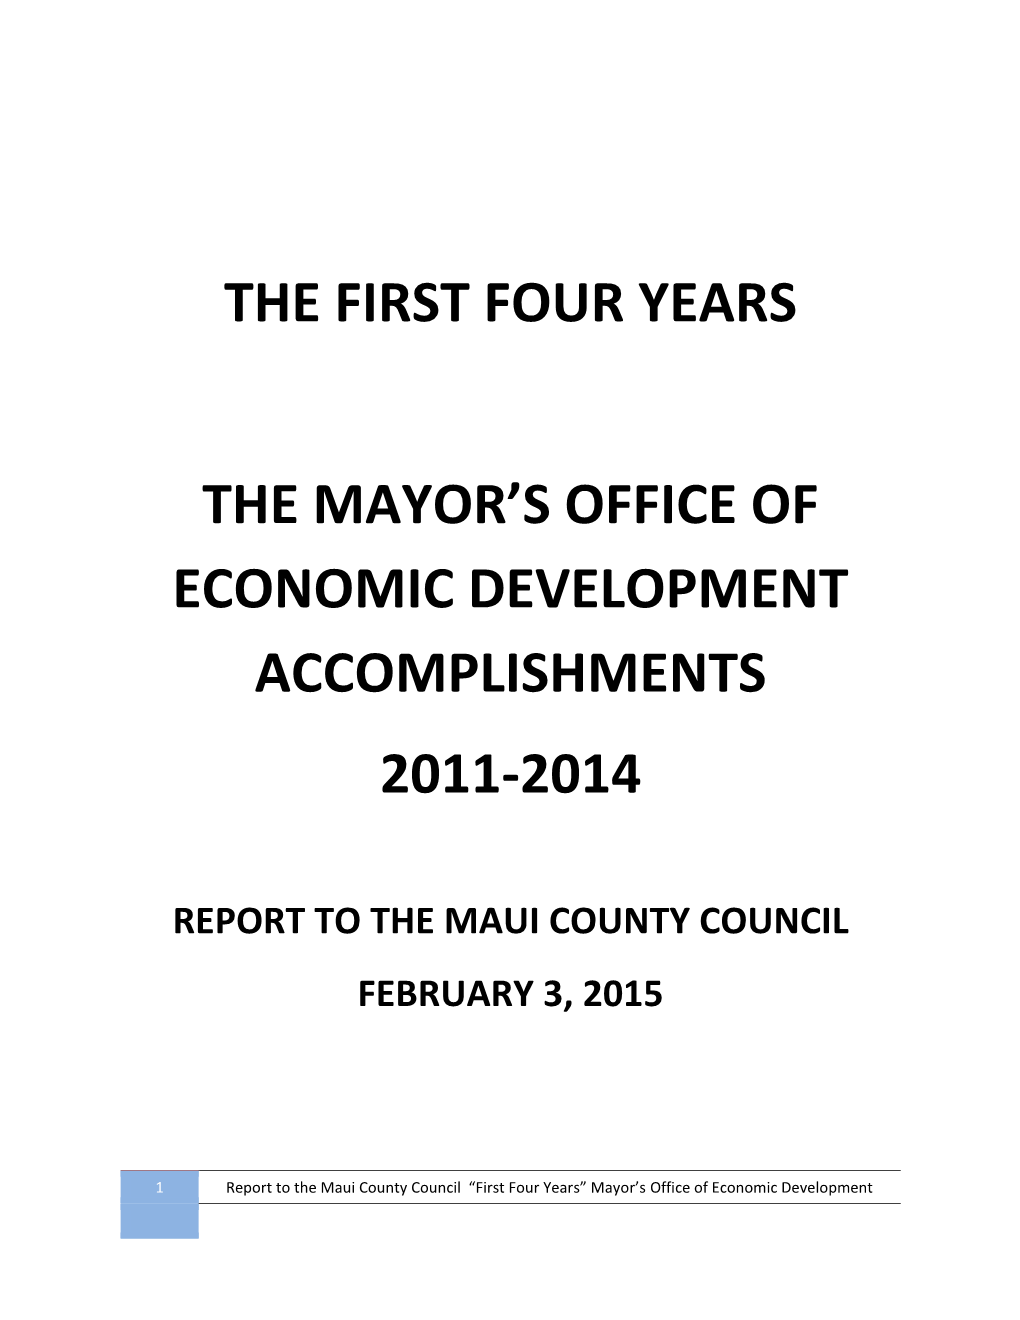 The First Four Years the Mayor's Office